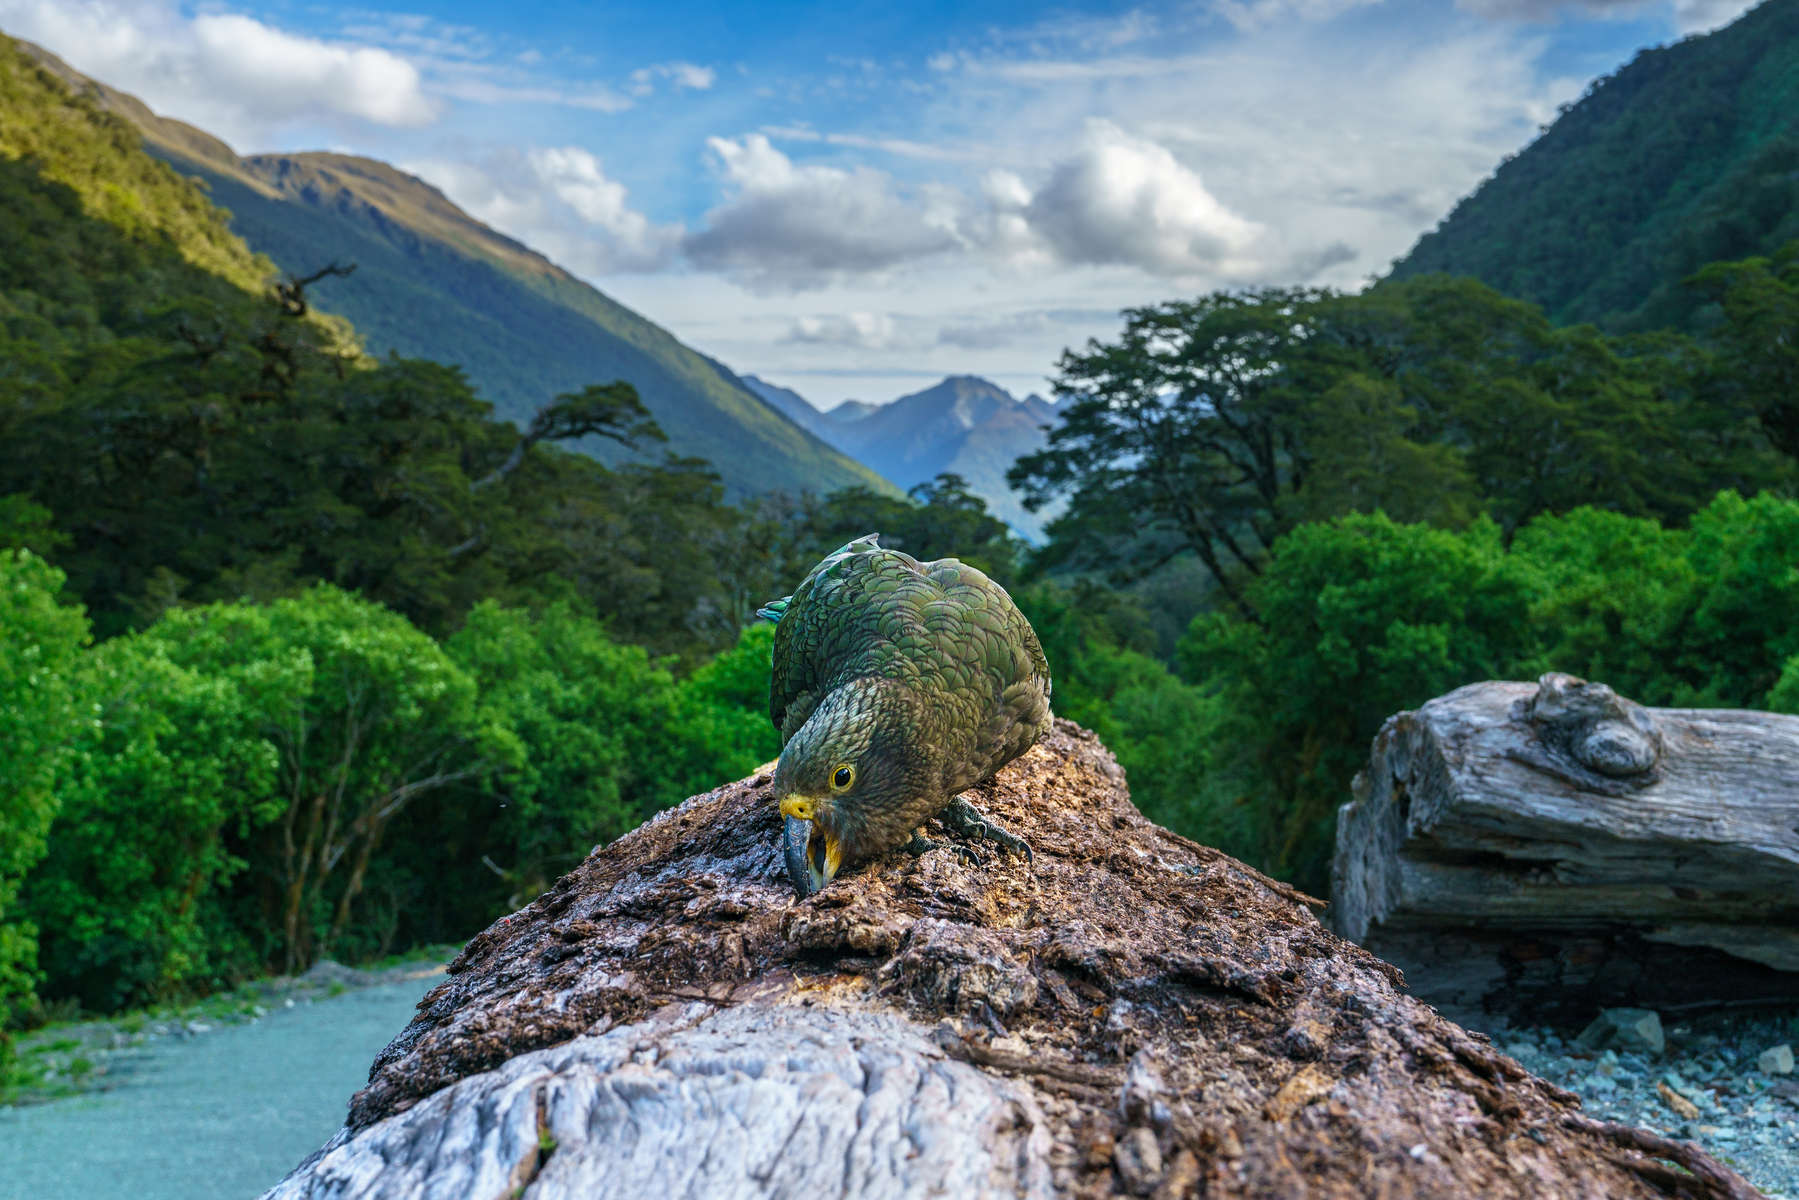 kea, mountain parrot on a tree trunk, southland, southern alps, new zealand